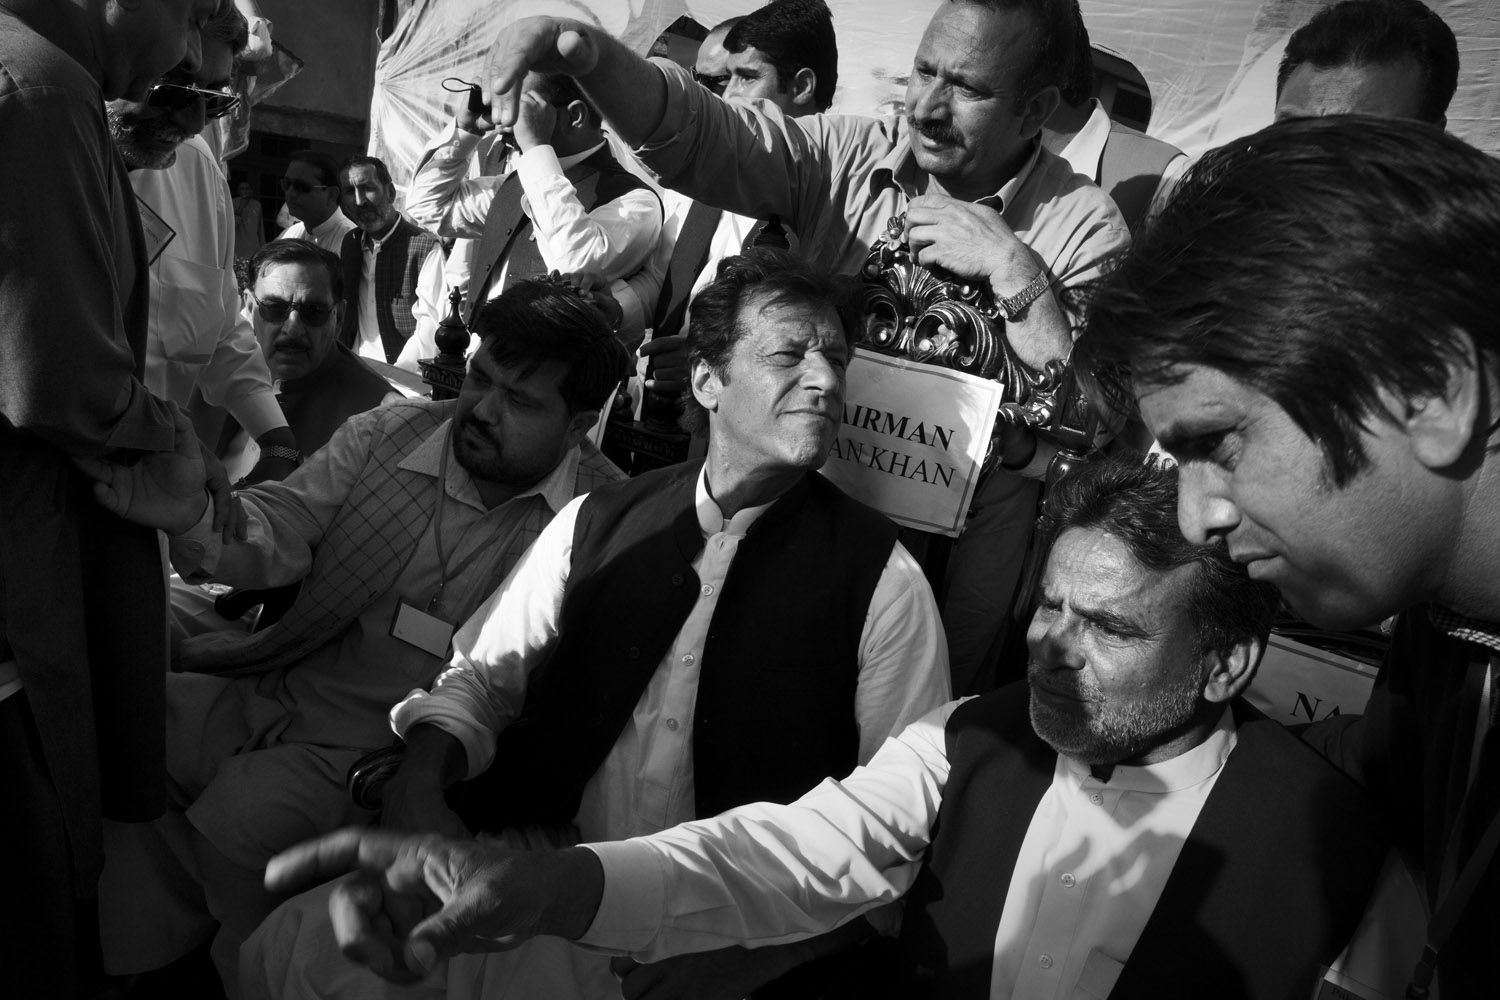 May 3, 2013. Imran Khan before his speech to supporters in Abbotabad.